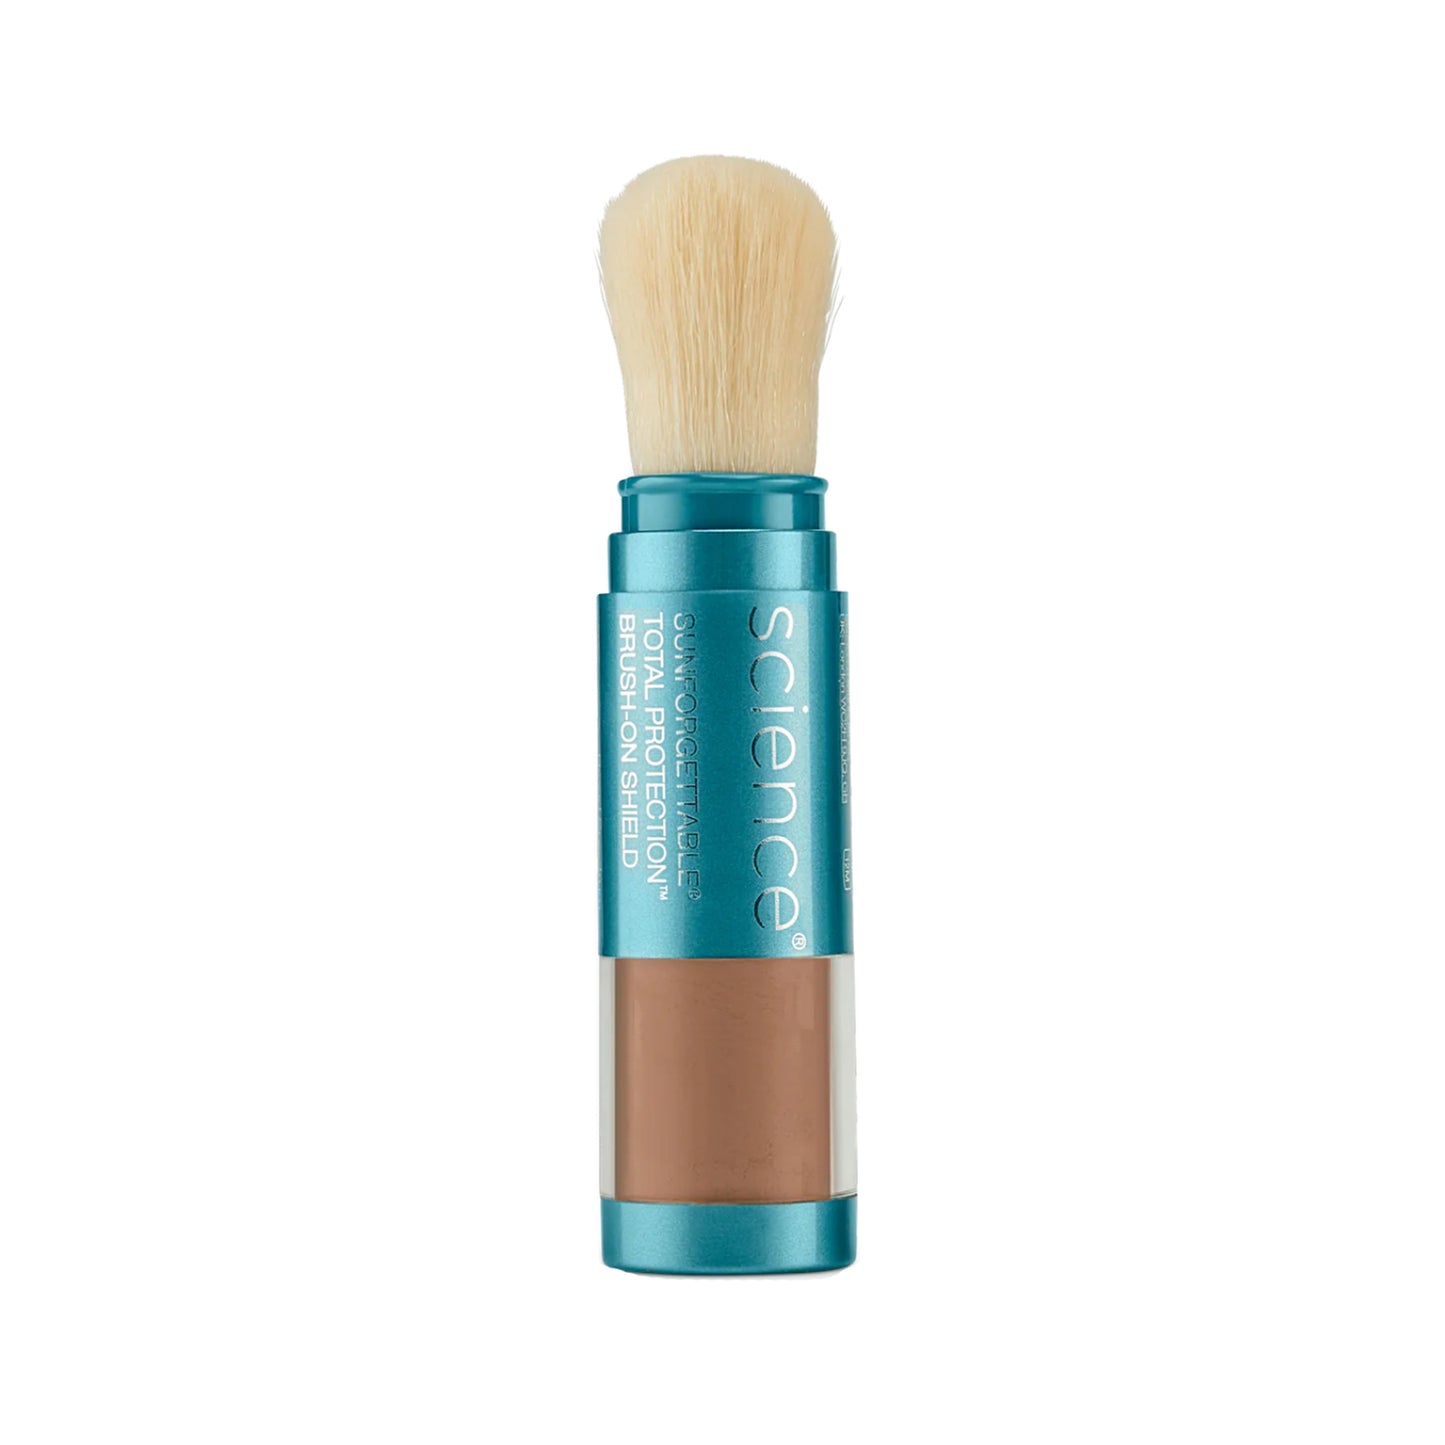 Colorescience Sunforgettable Total Protection™ Brush-On Shield SPF 50